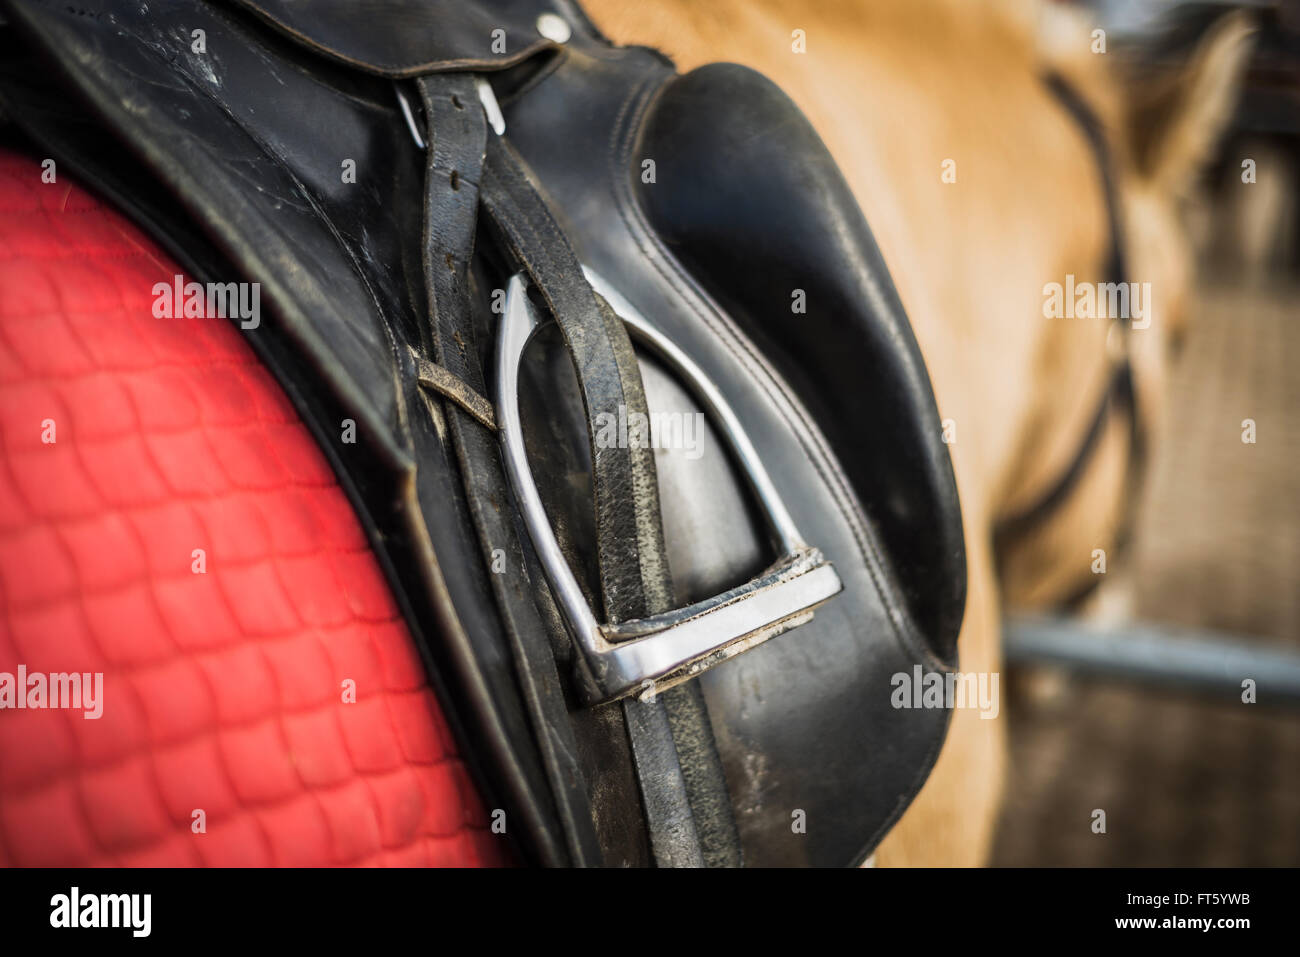 Leather saddle with stirrup and a red saddlecloth on back of a Norwegian Fjord horse outside a horse stable beriofe a ride Stock Photo